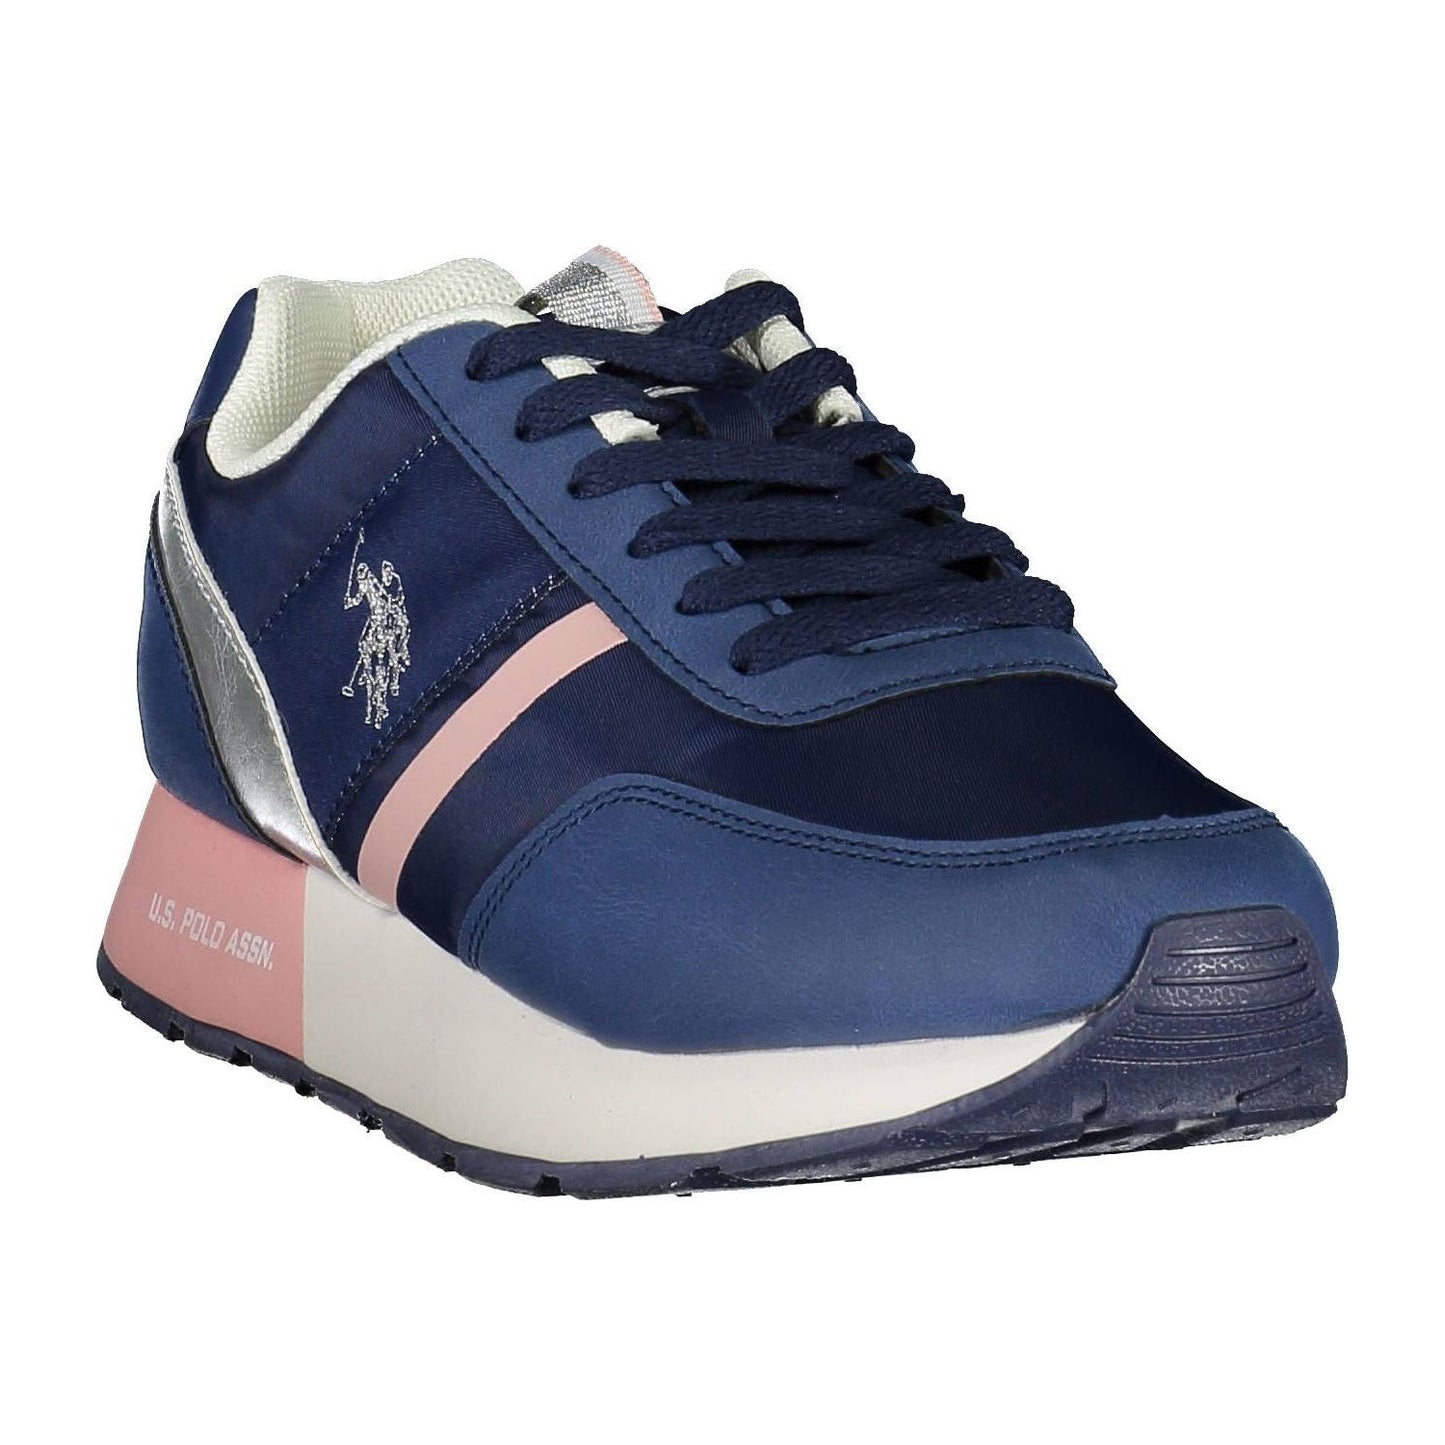 U.S. POLO ASSN.Chic Blue Lace-Up Sneakers with Logo AccentMcRichard Designer Brands£89.00